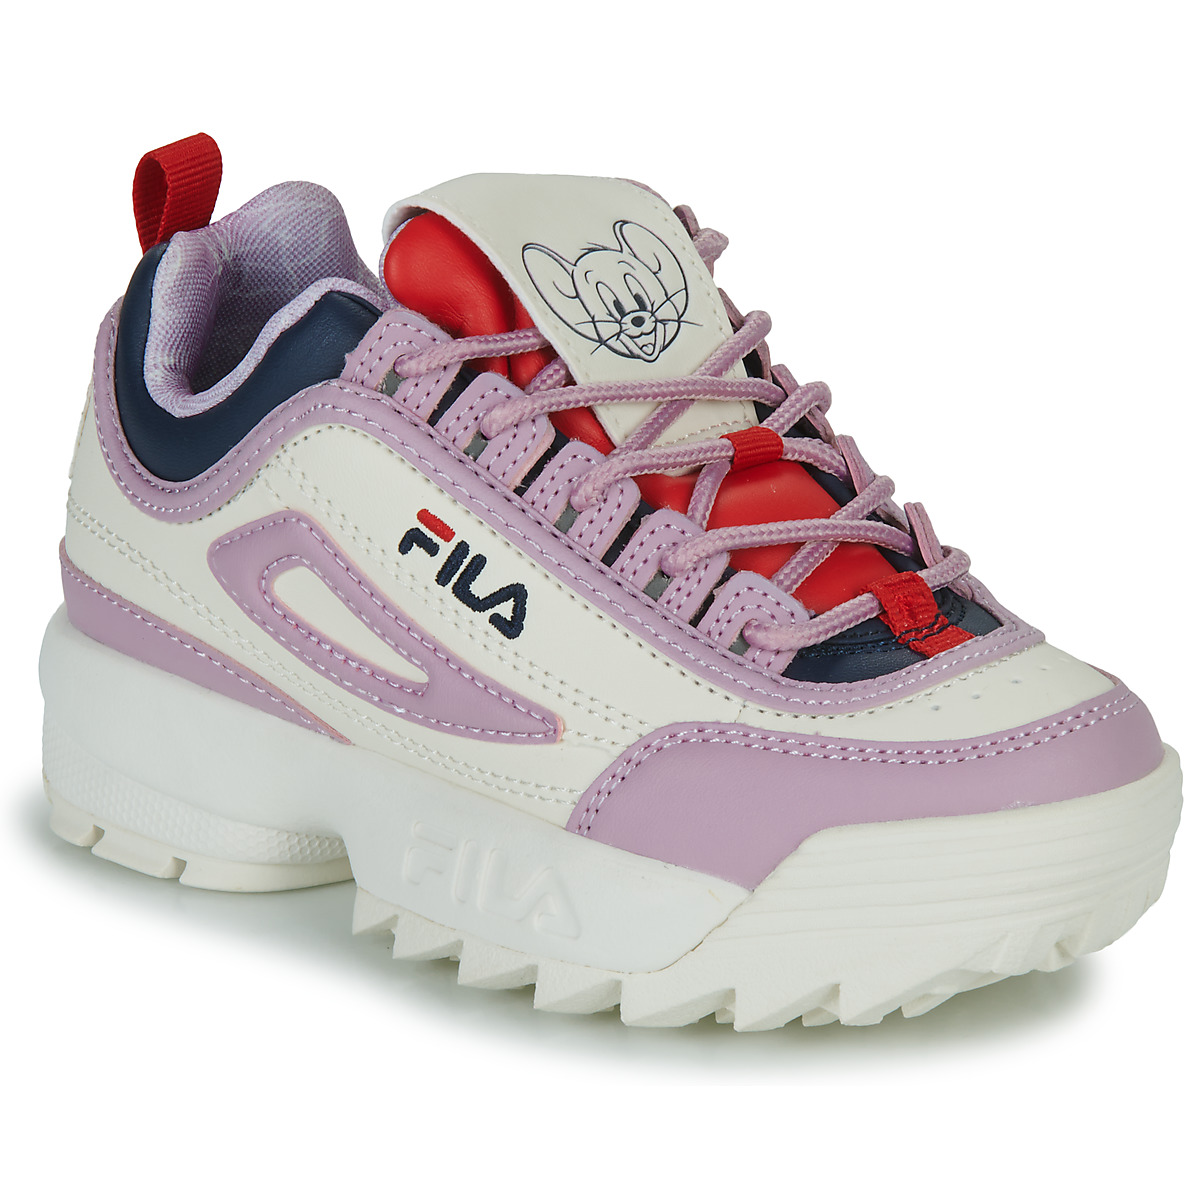 trainers NET Free - Spartoo - ! DISRUPTOR Shoes Mauve top | Child WB Low delivery Fila